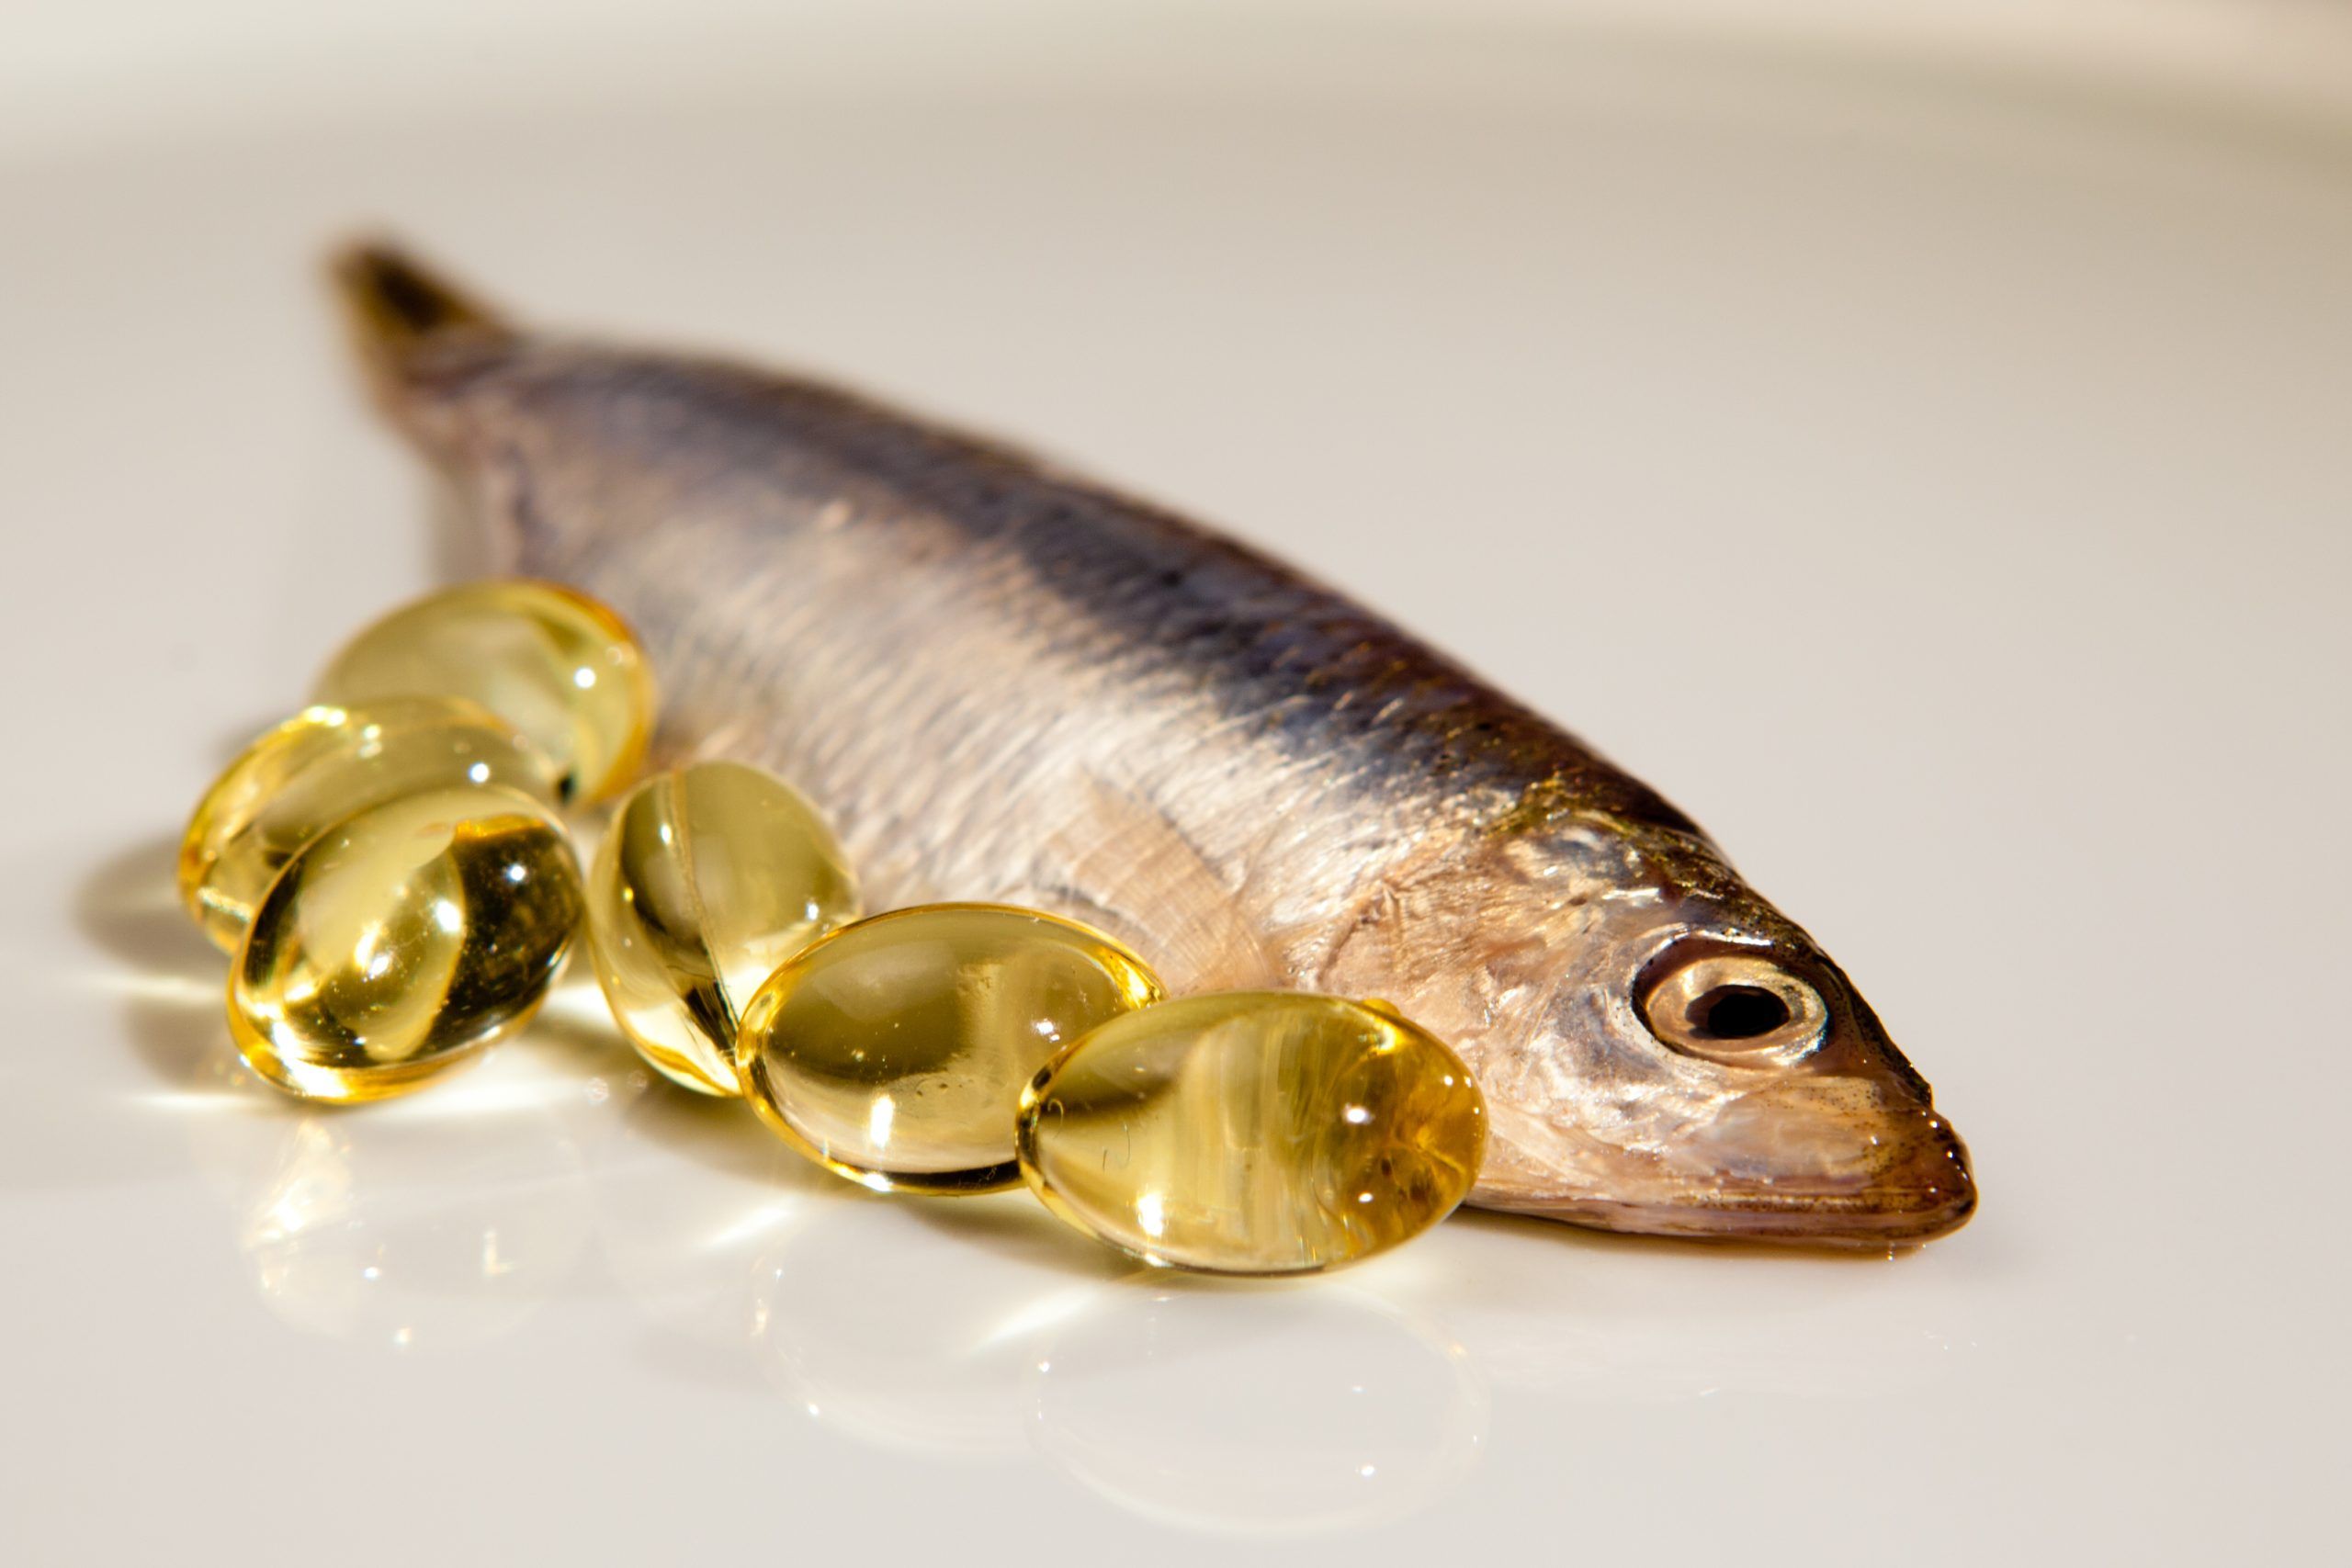 The study looked at fish oil supplements that contain omega 3.